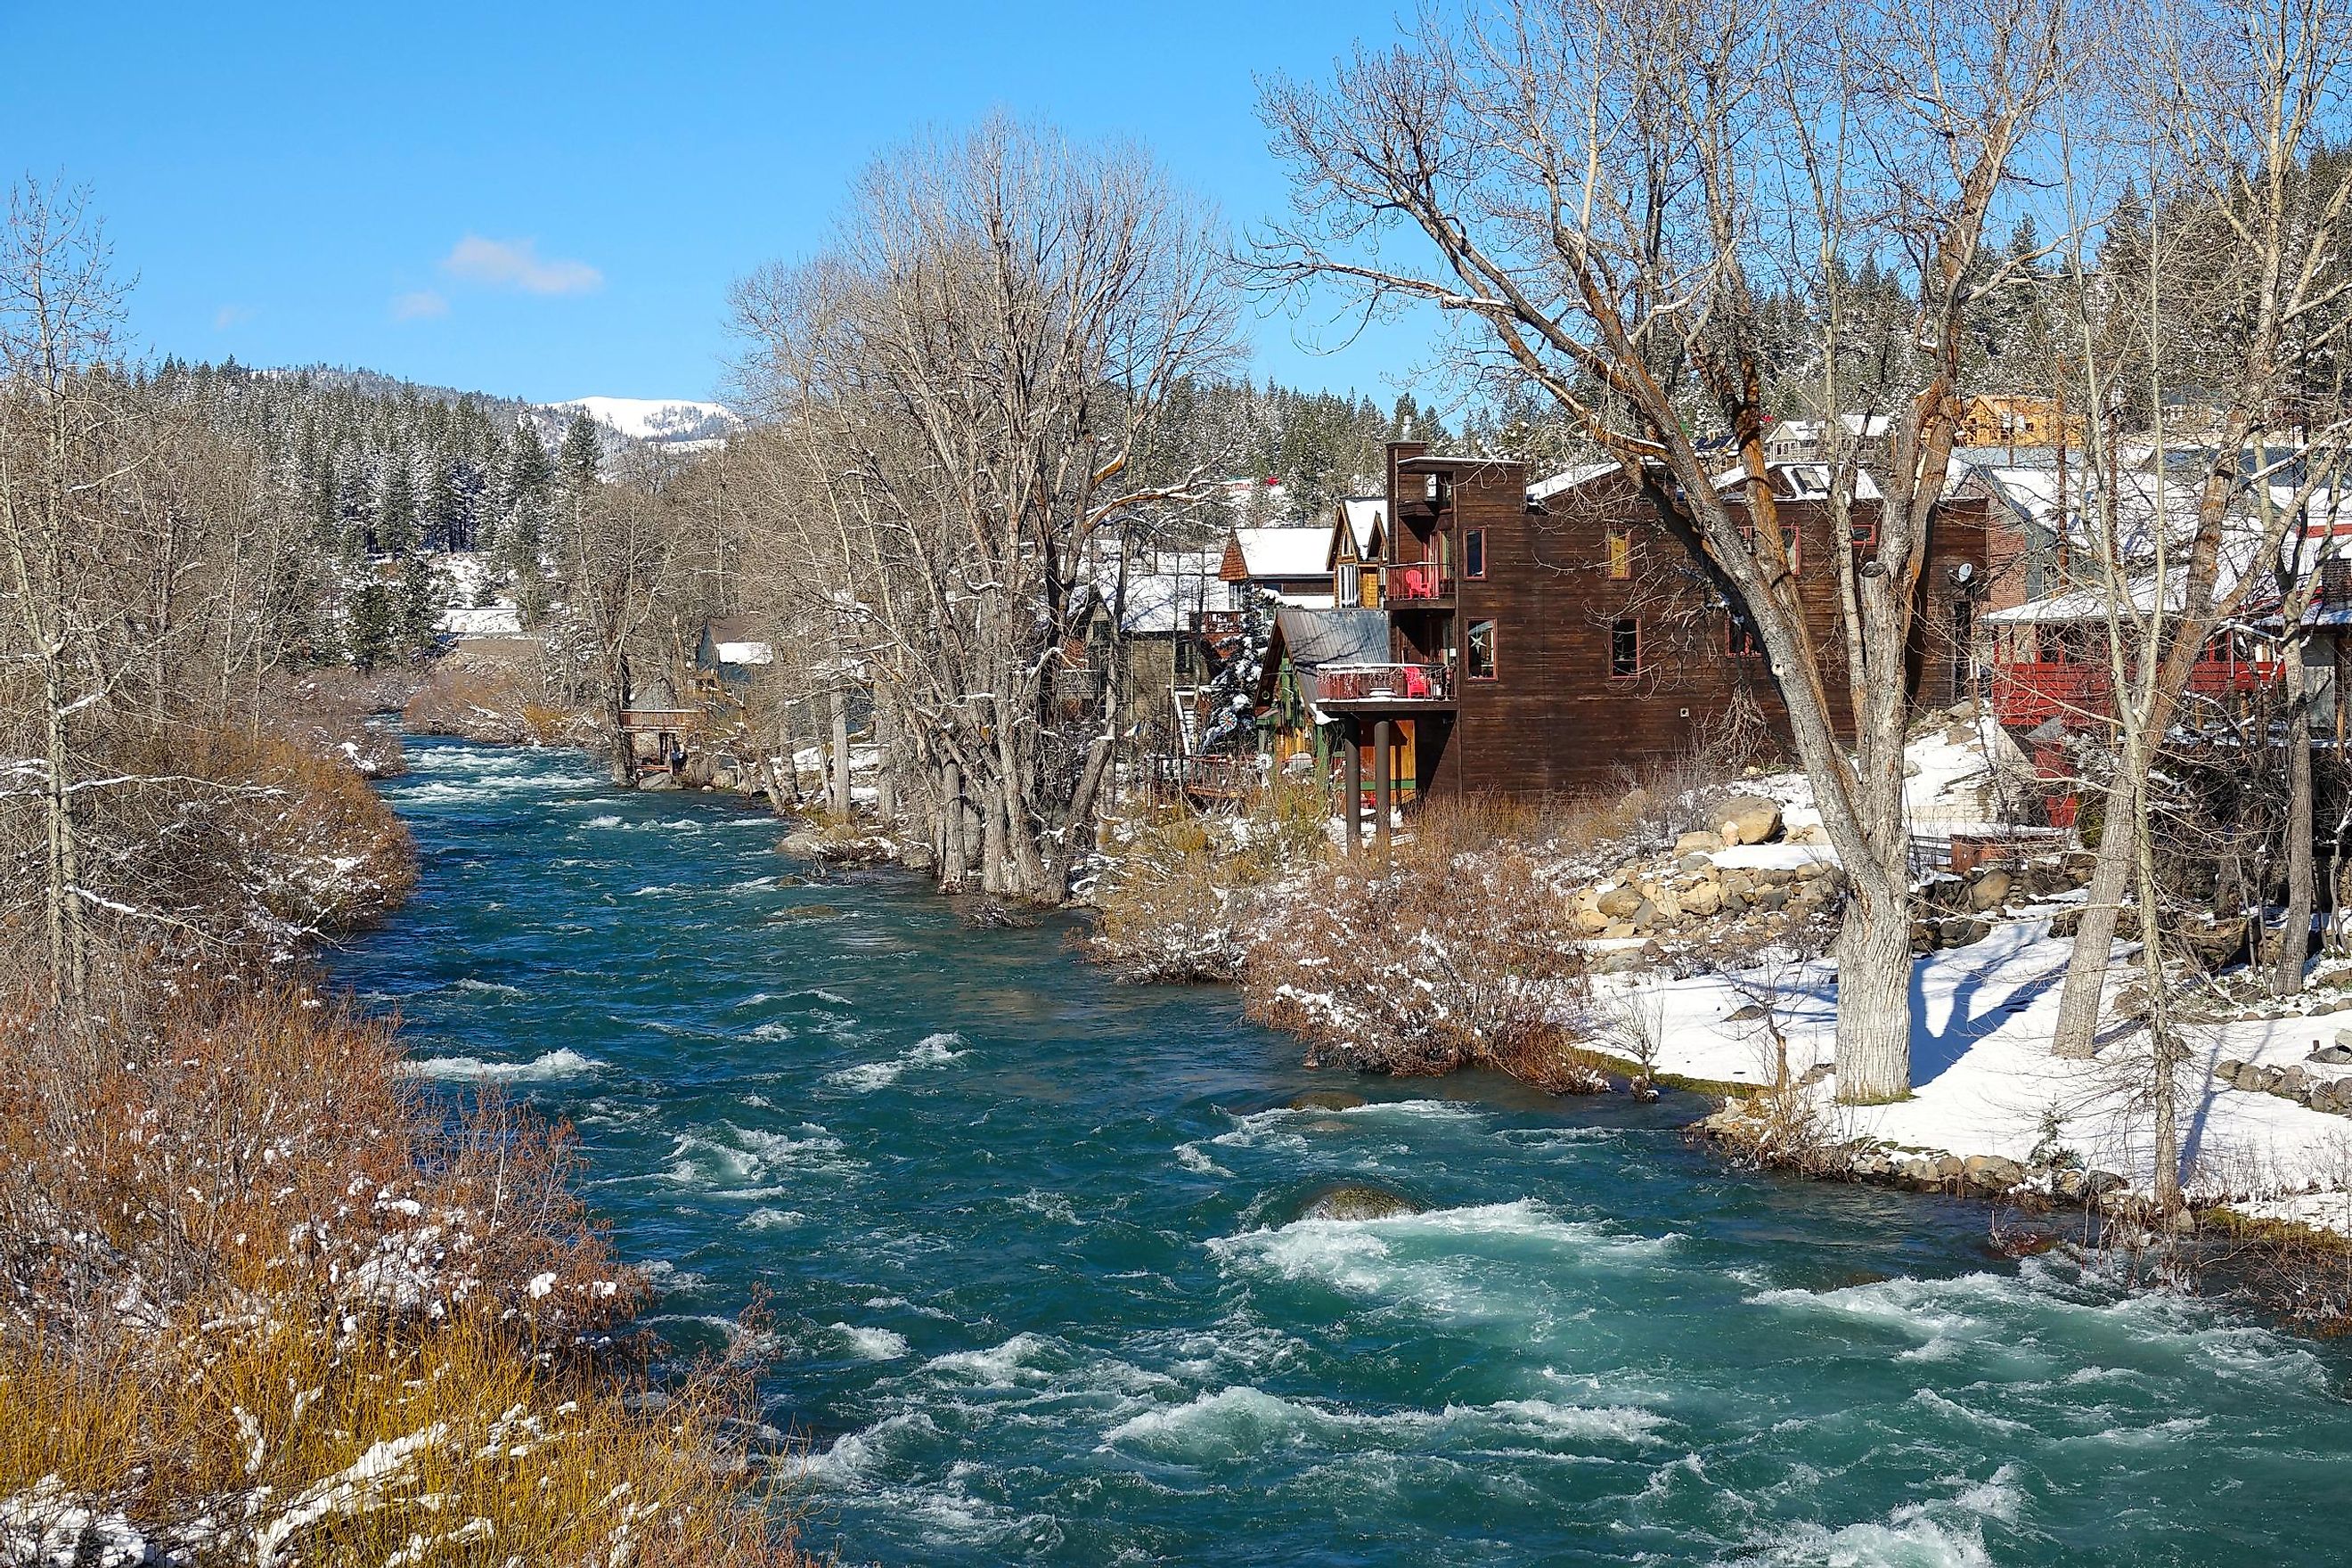 The beautiful Emerald River flowing past old wooden houses in scenic Truckee, California.